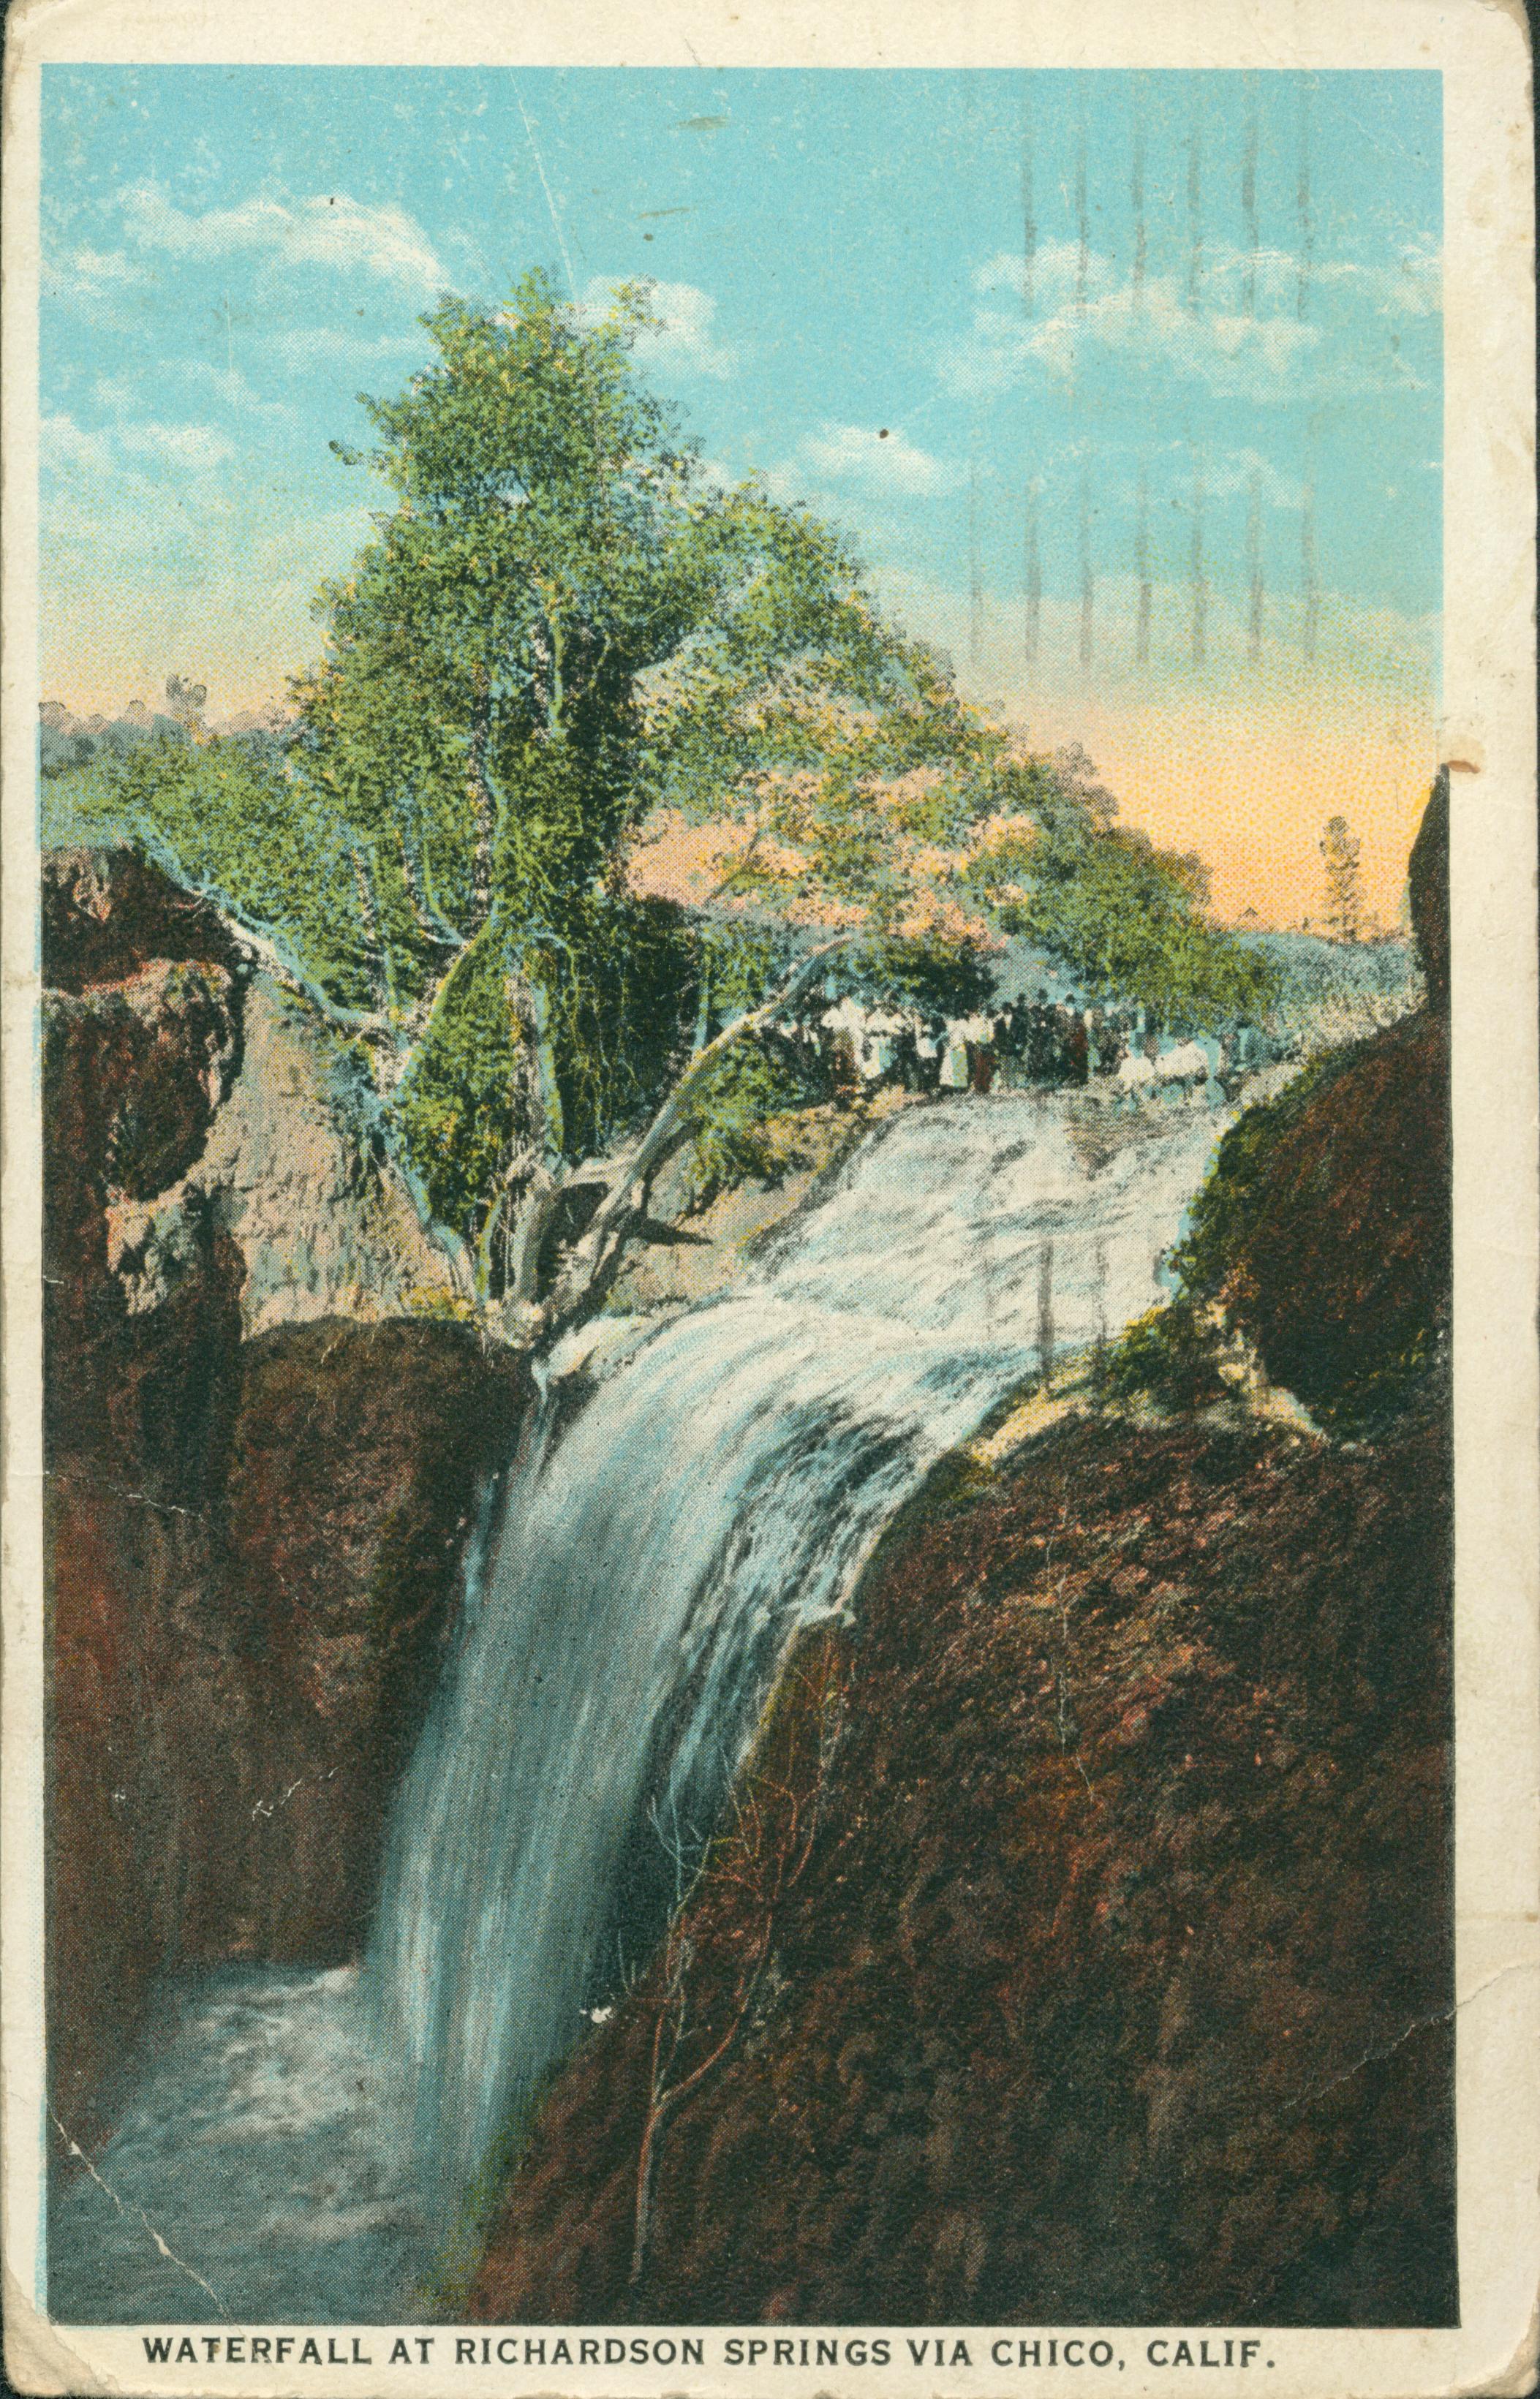 Shows a waterfall with several onlookers standing under a tree